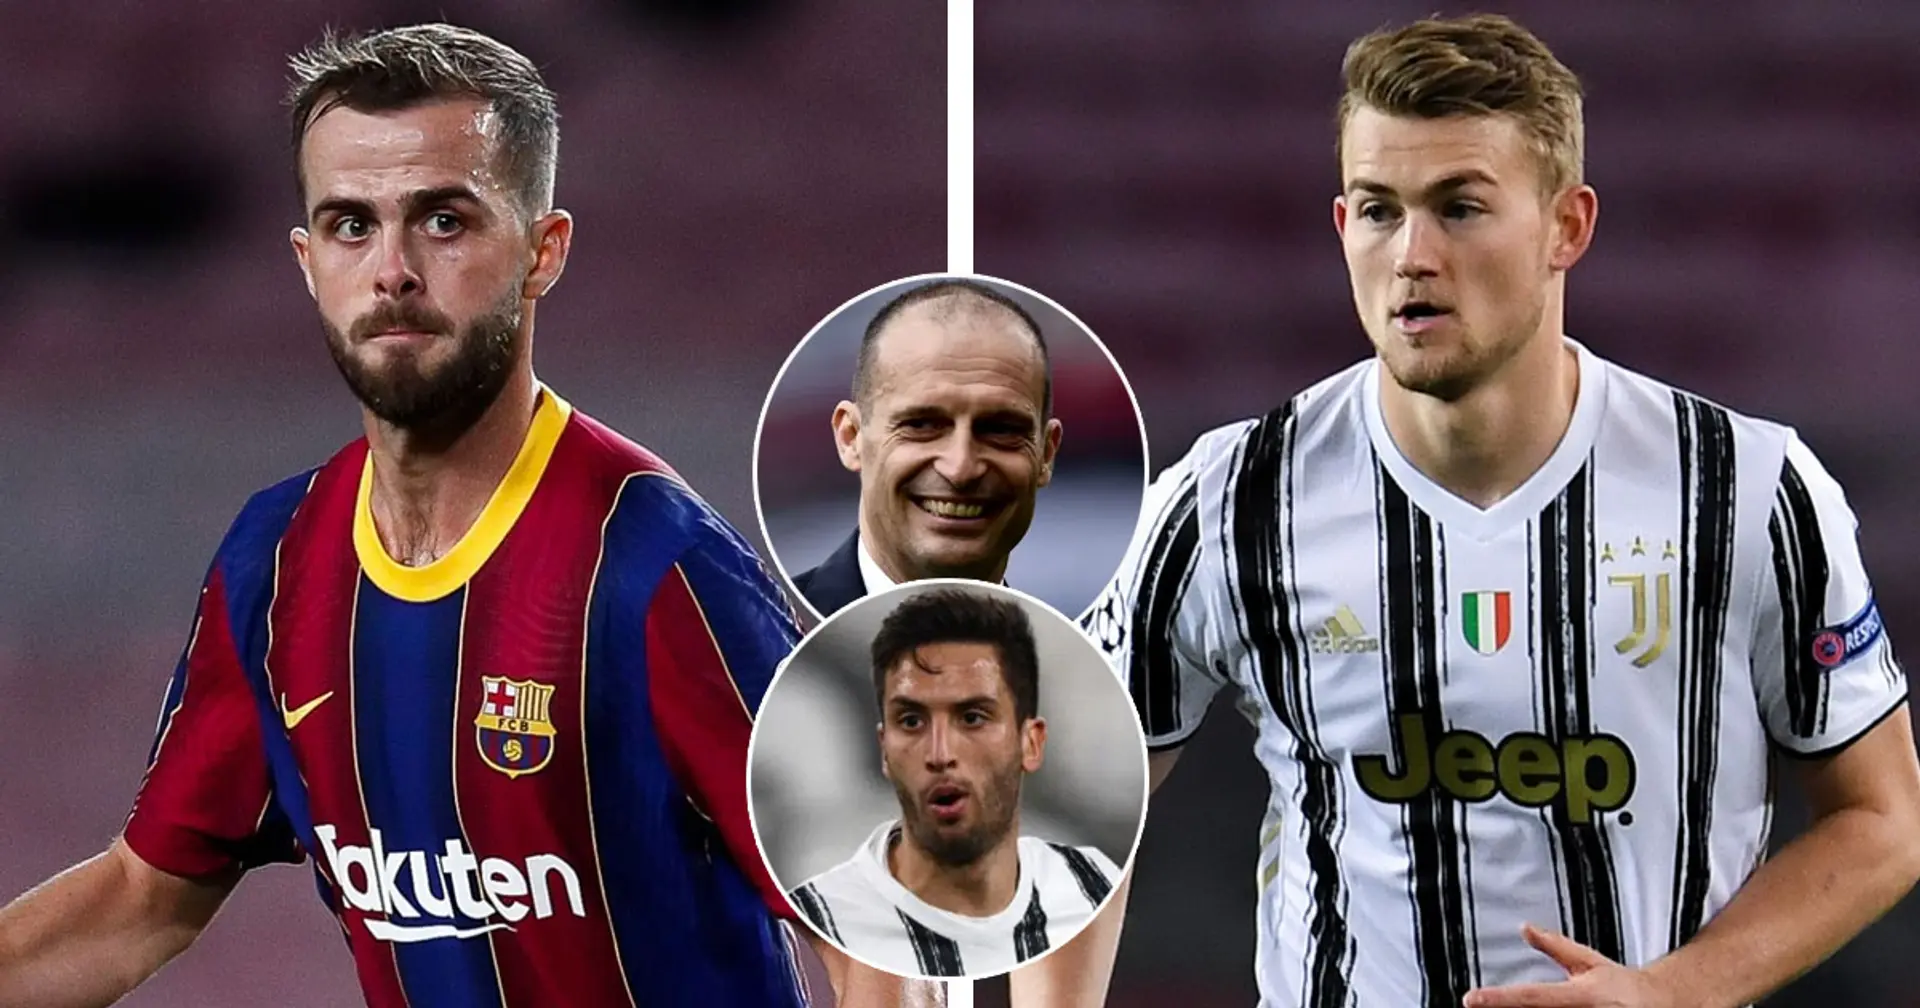 Juventus greenlight Pjanic return, Barca willing to trade for De Ligt or 2 others (reliability: 4 stars)